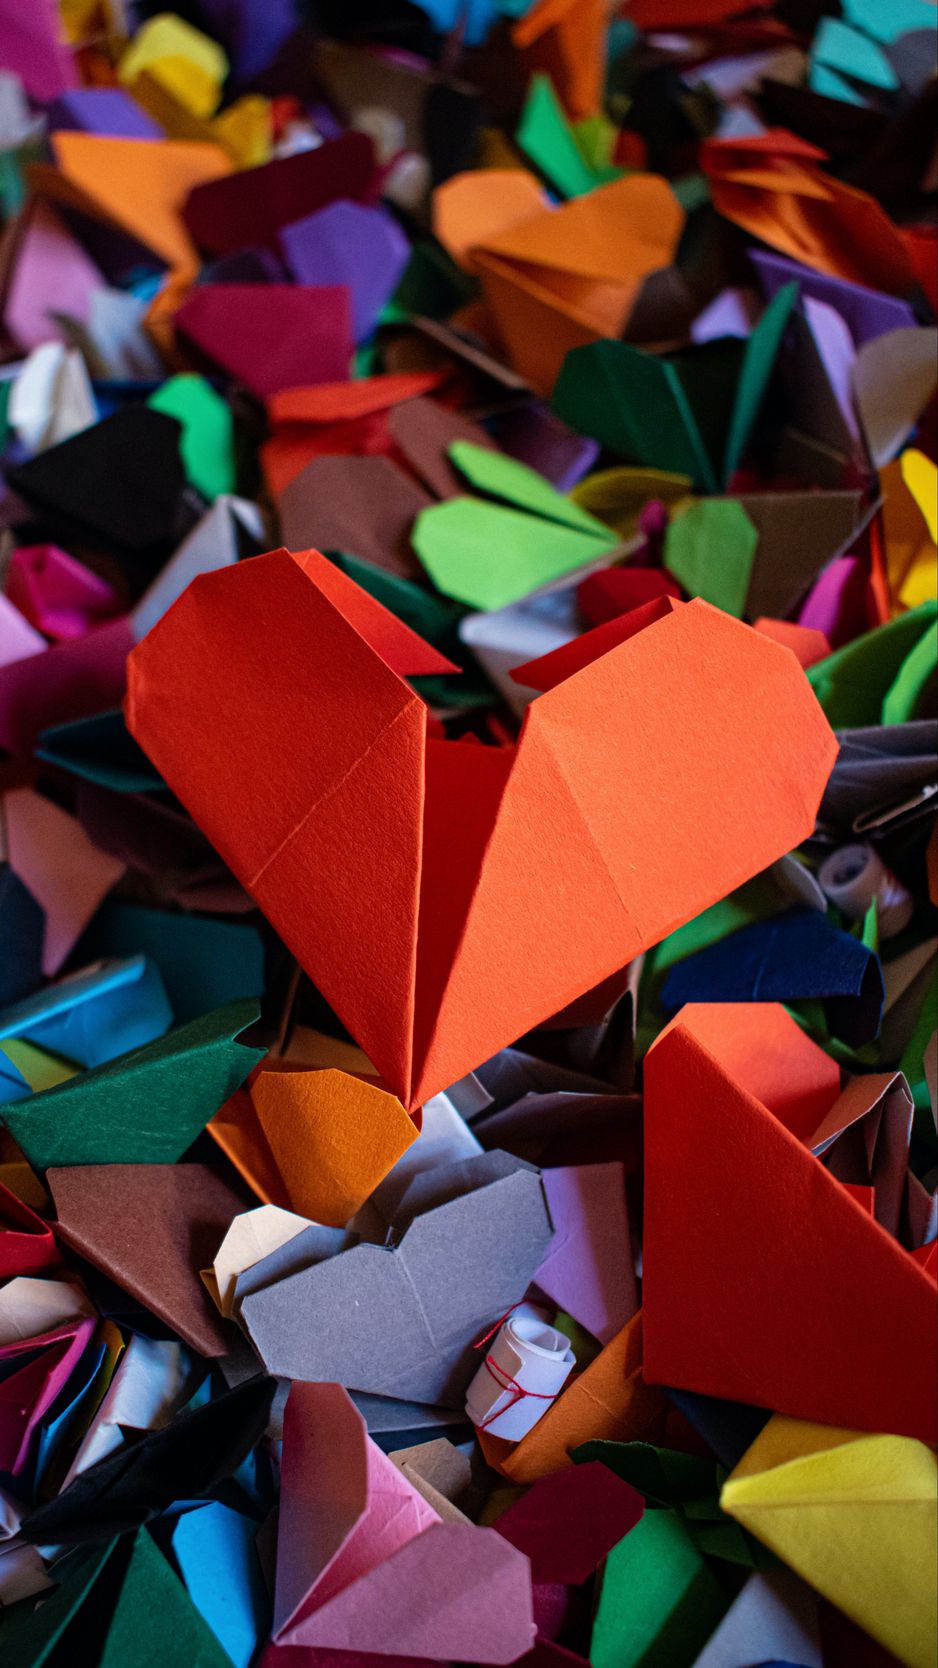 Download wallpaper 938x1668 hearts, origami, paper, colorful ...